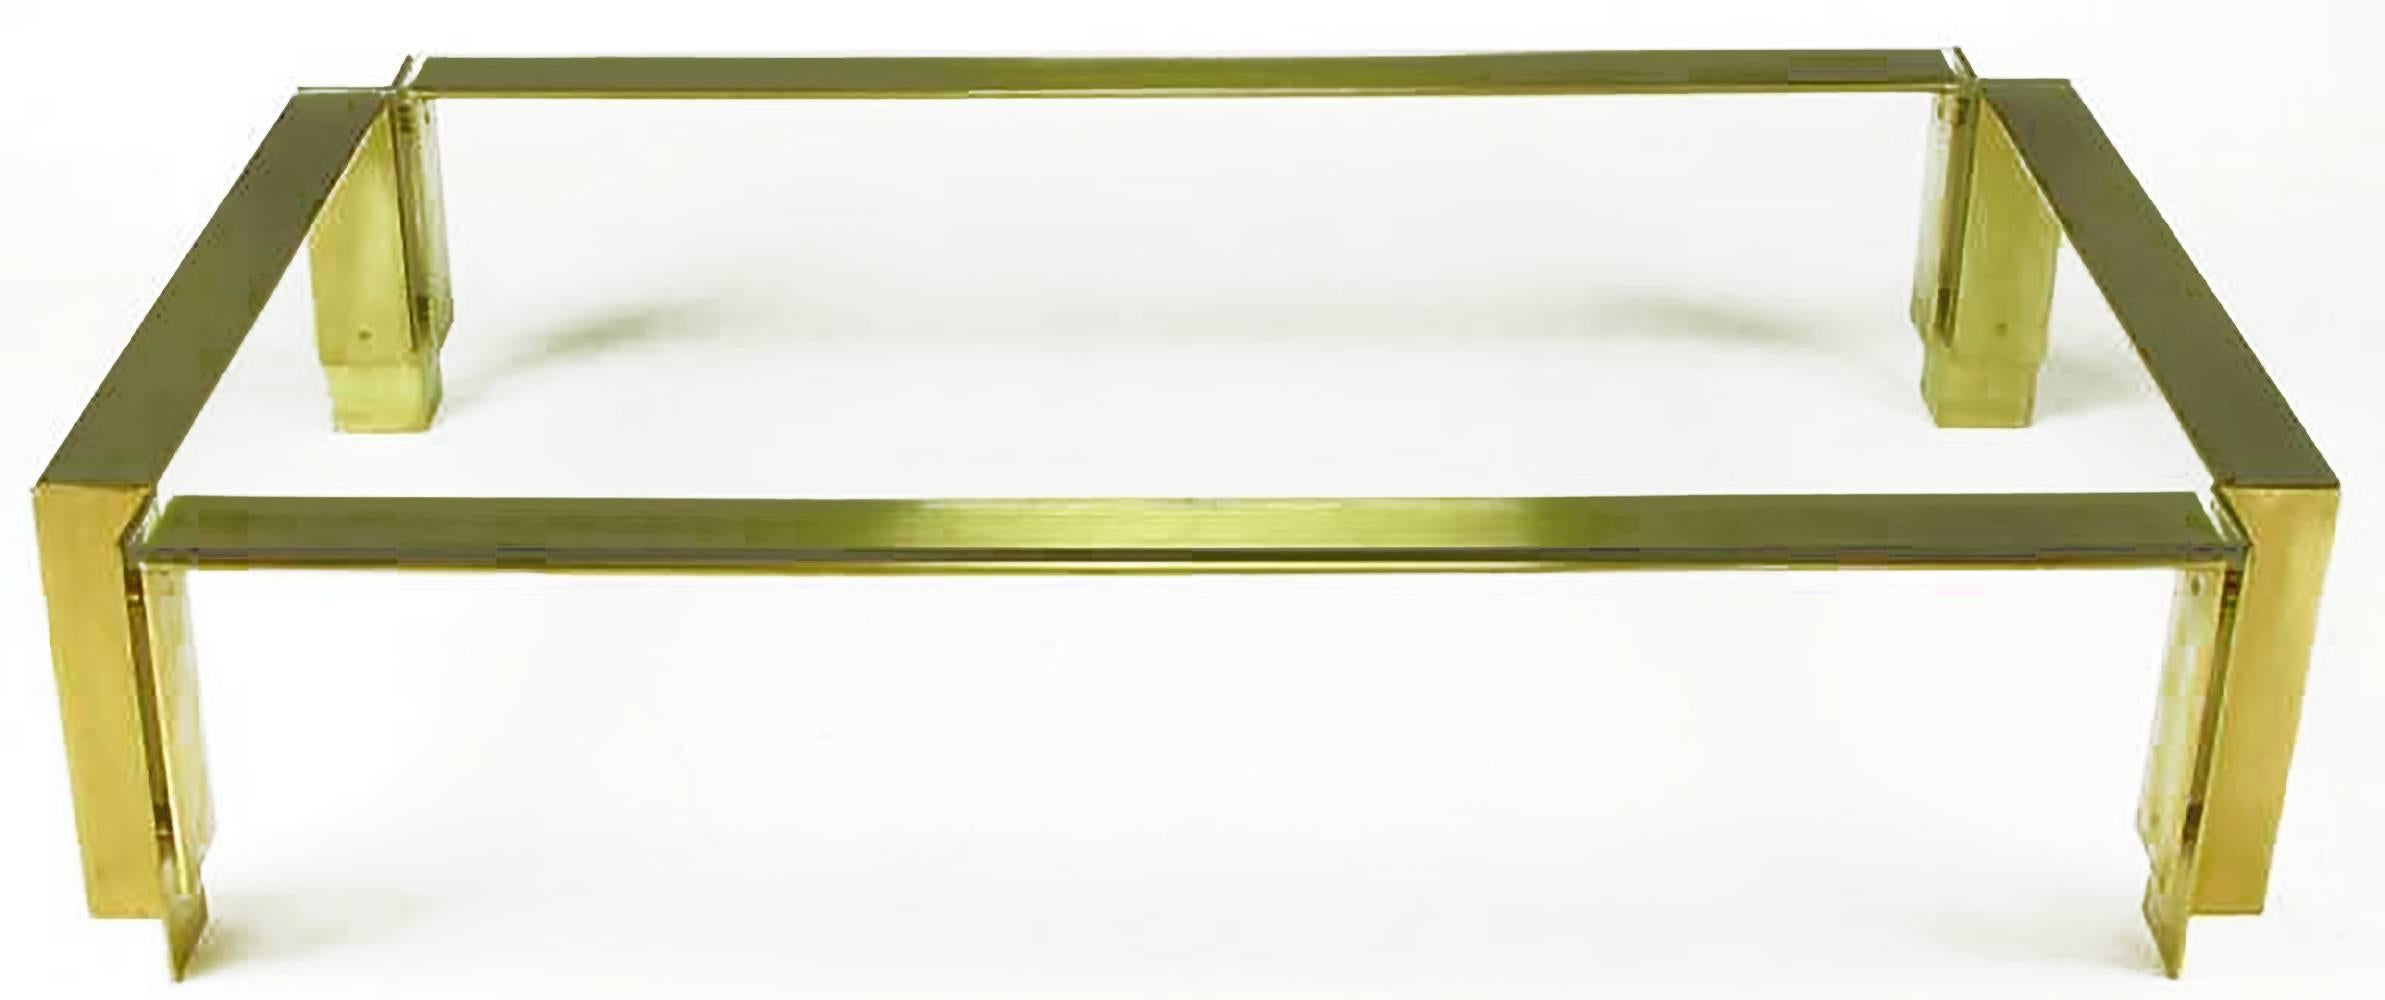 Architecturally inspired Postmodern coffee table constructed of solid brushed brass inward angle legs and floating U-shaped flat bar supports. Well made and heavy, with half-inch thick excised corners glass top. From an estate with many custom items